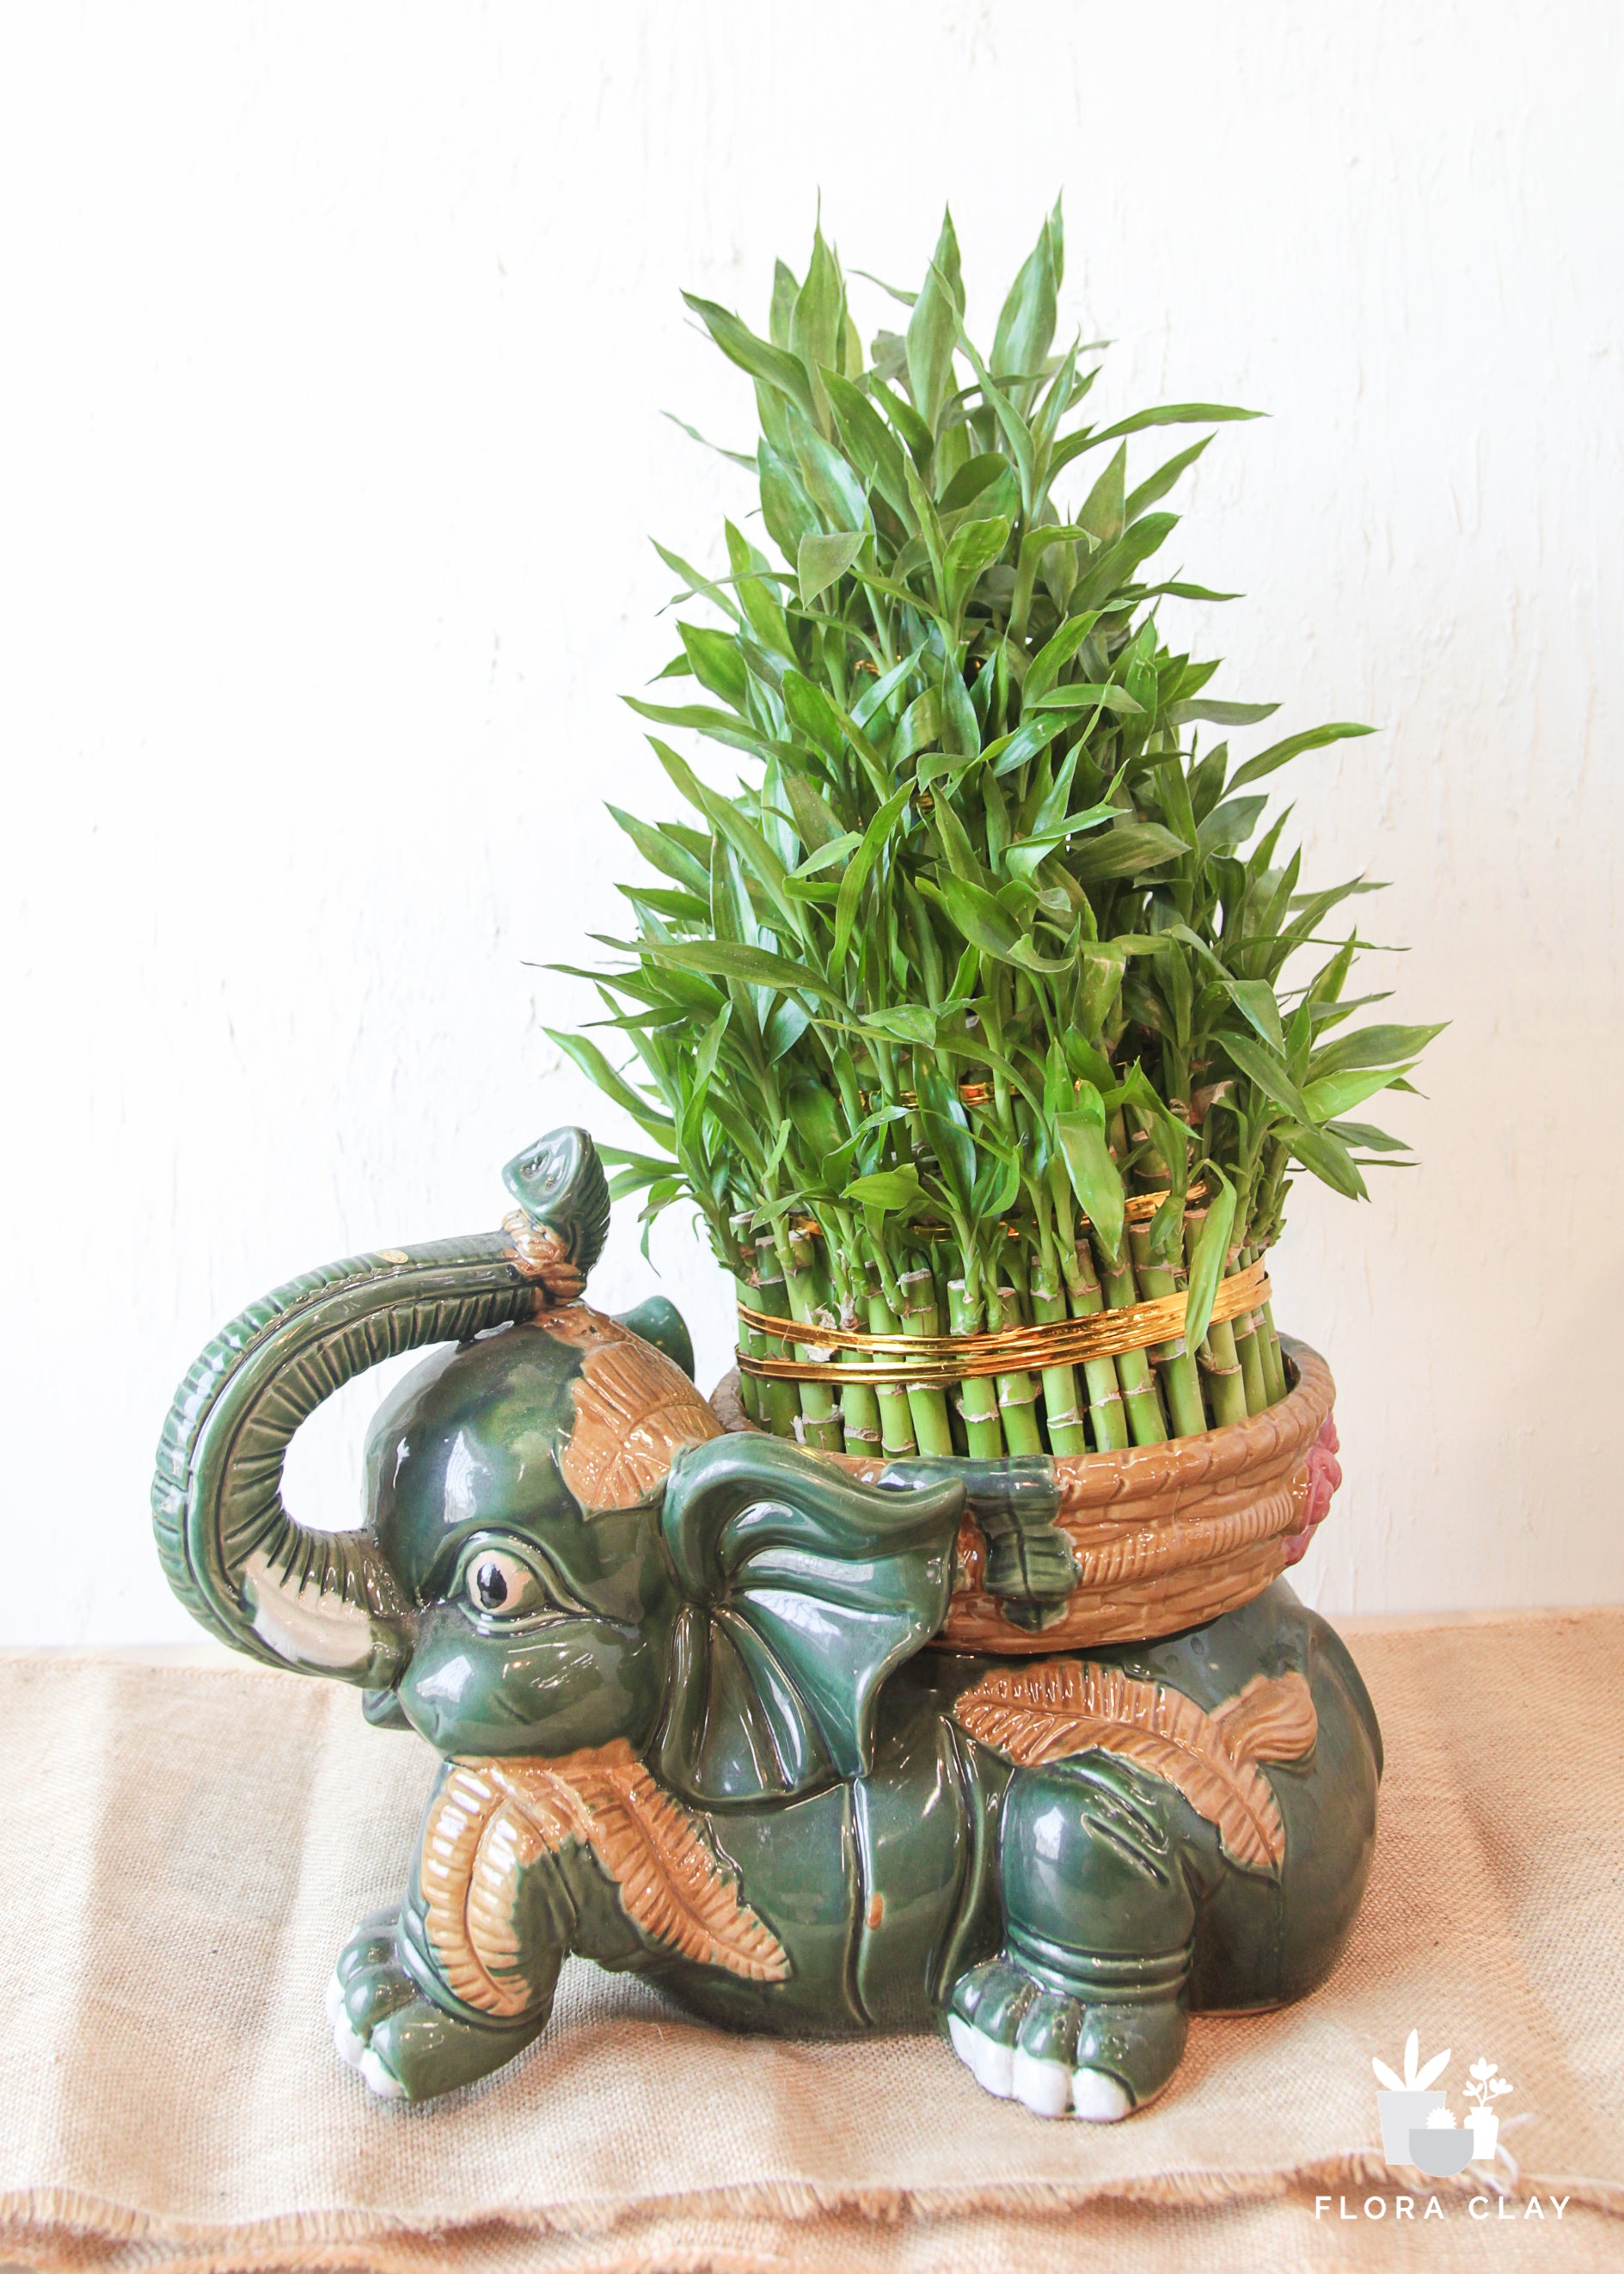 Water bamboo in Elephant Planter